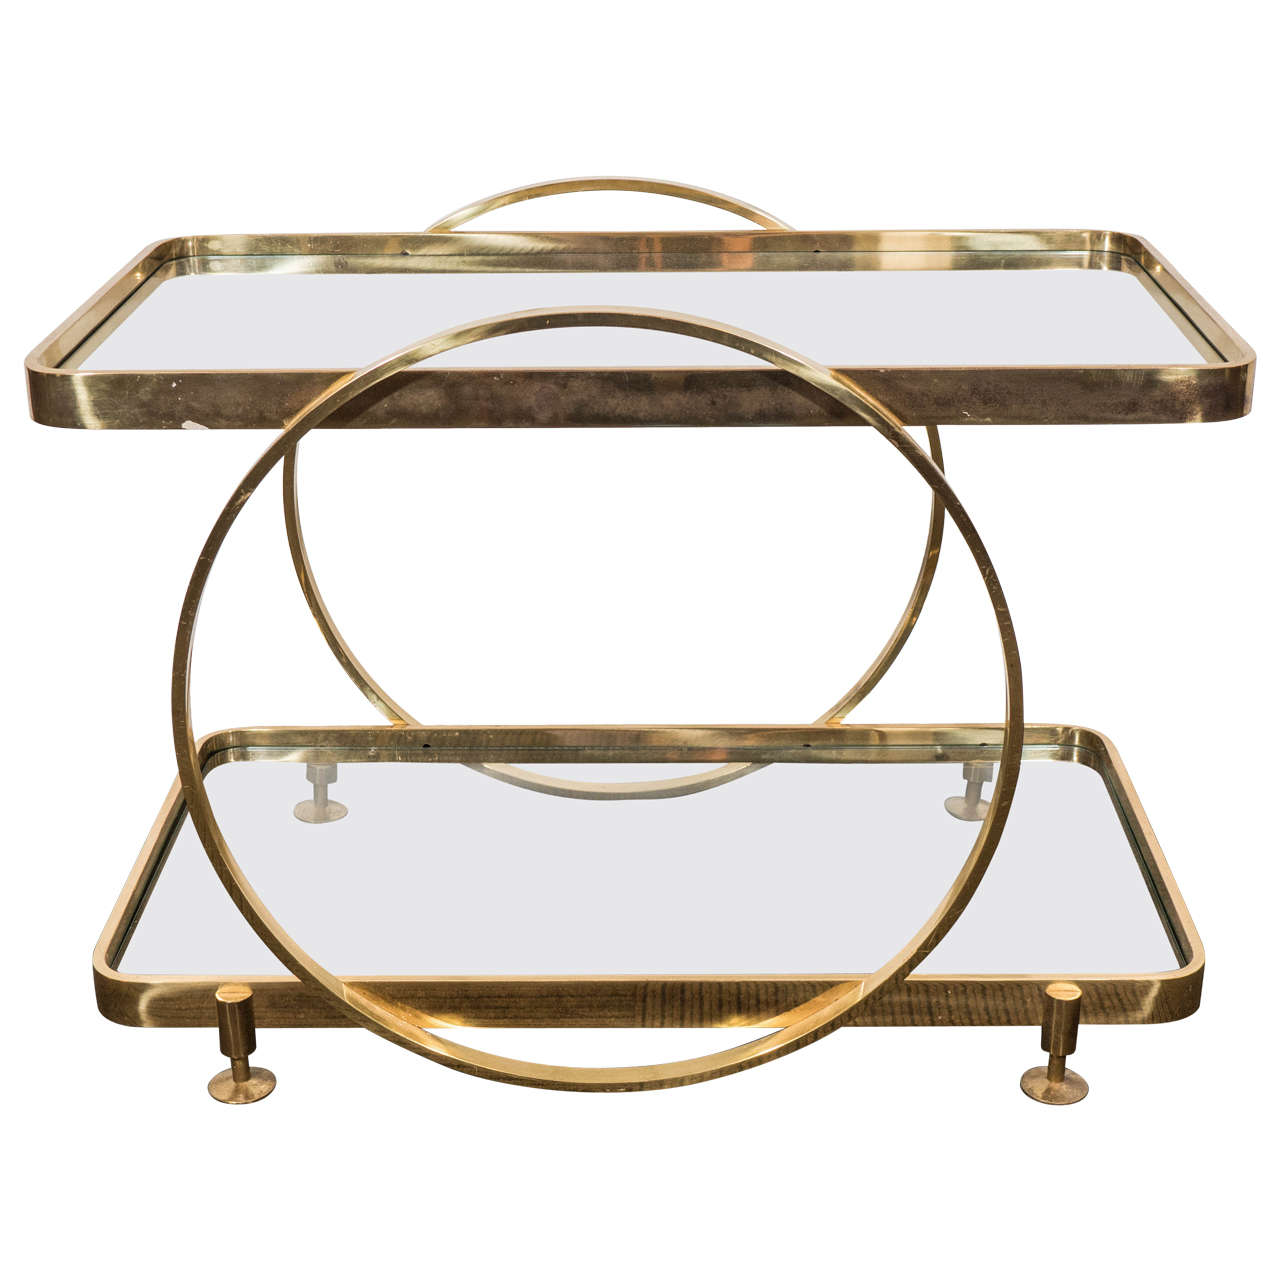 Midcentury Italian Two-Tier Brass Serving or Side Table